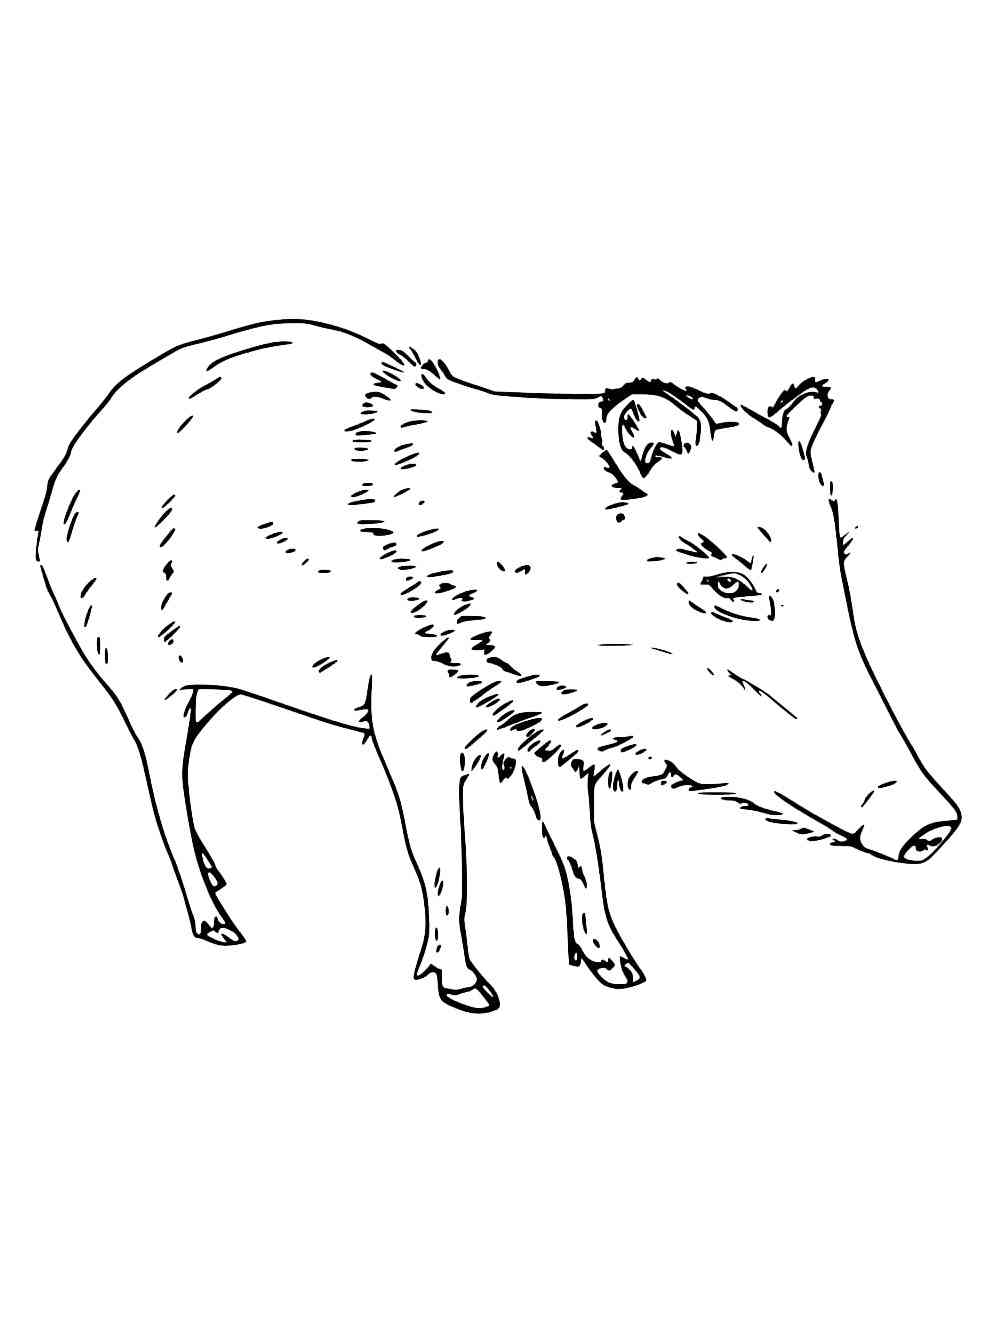 Collared Peccary coloring page